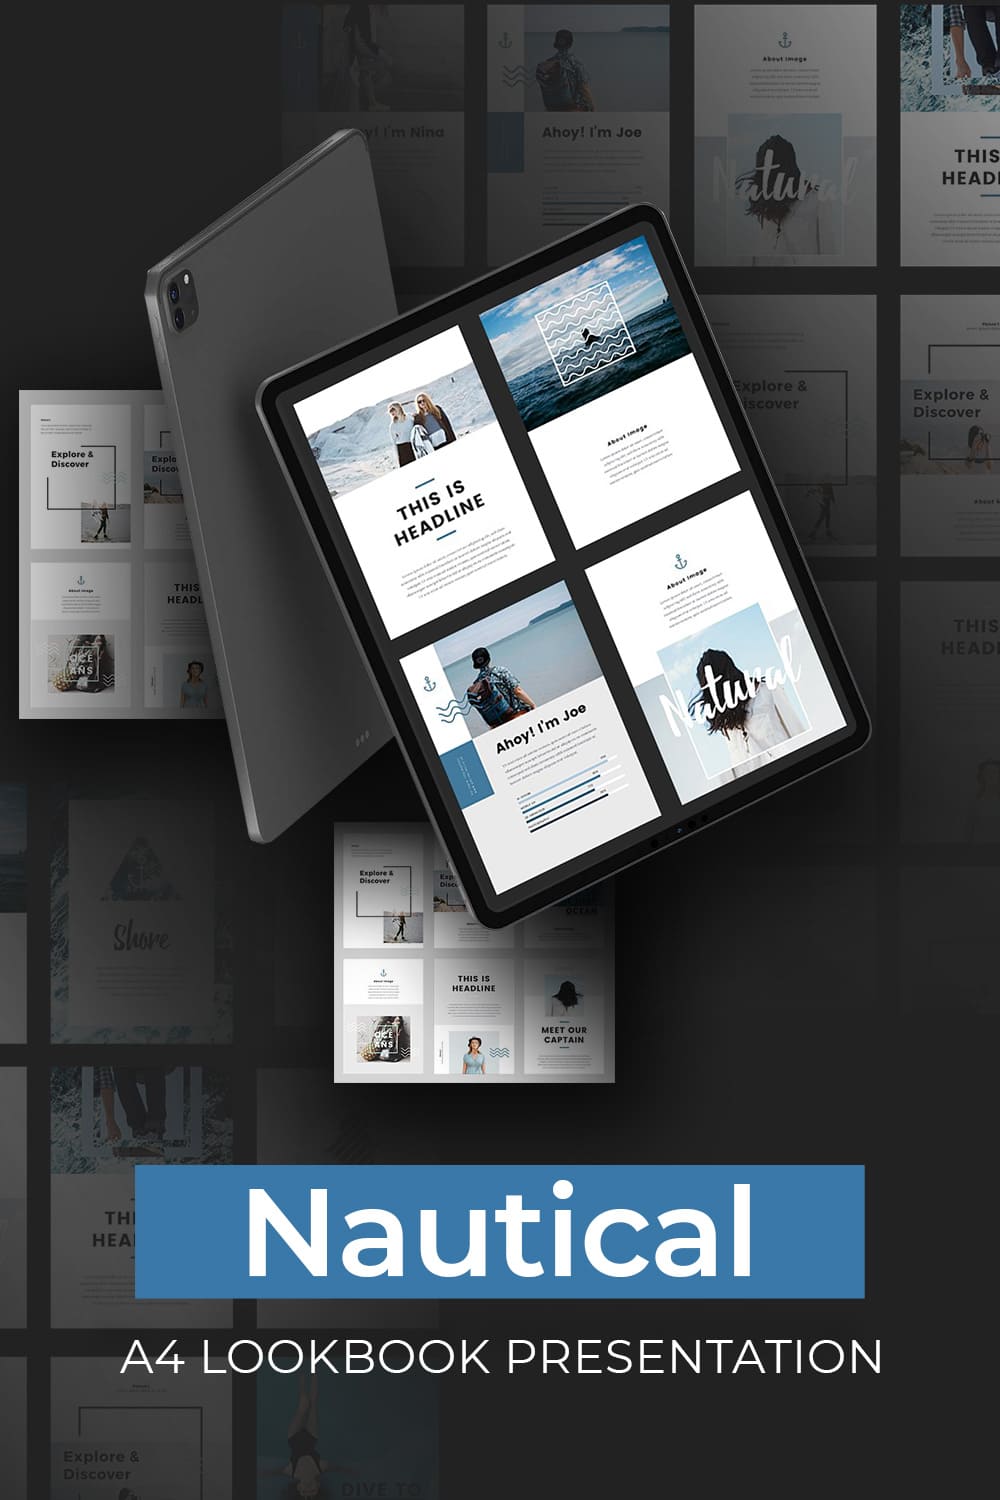 Nautical - A4 Printable PowerPoint by MasterBundles Pinterest Collage Image.